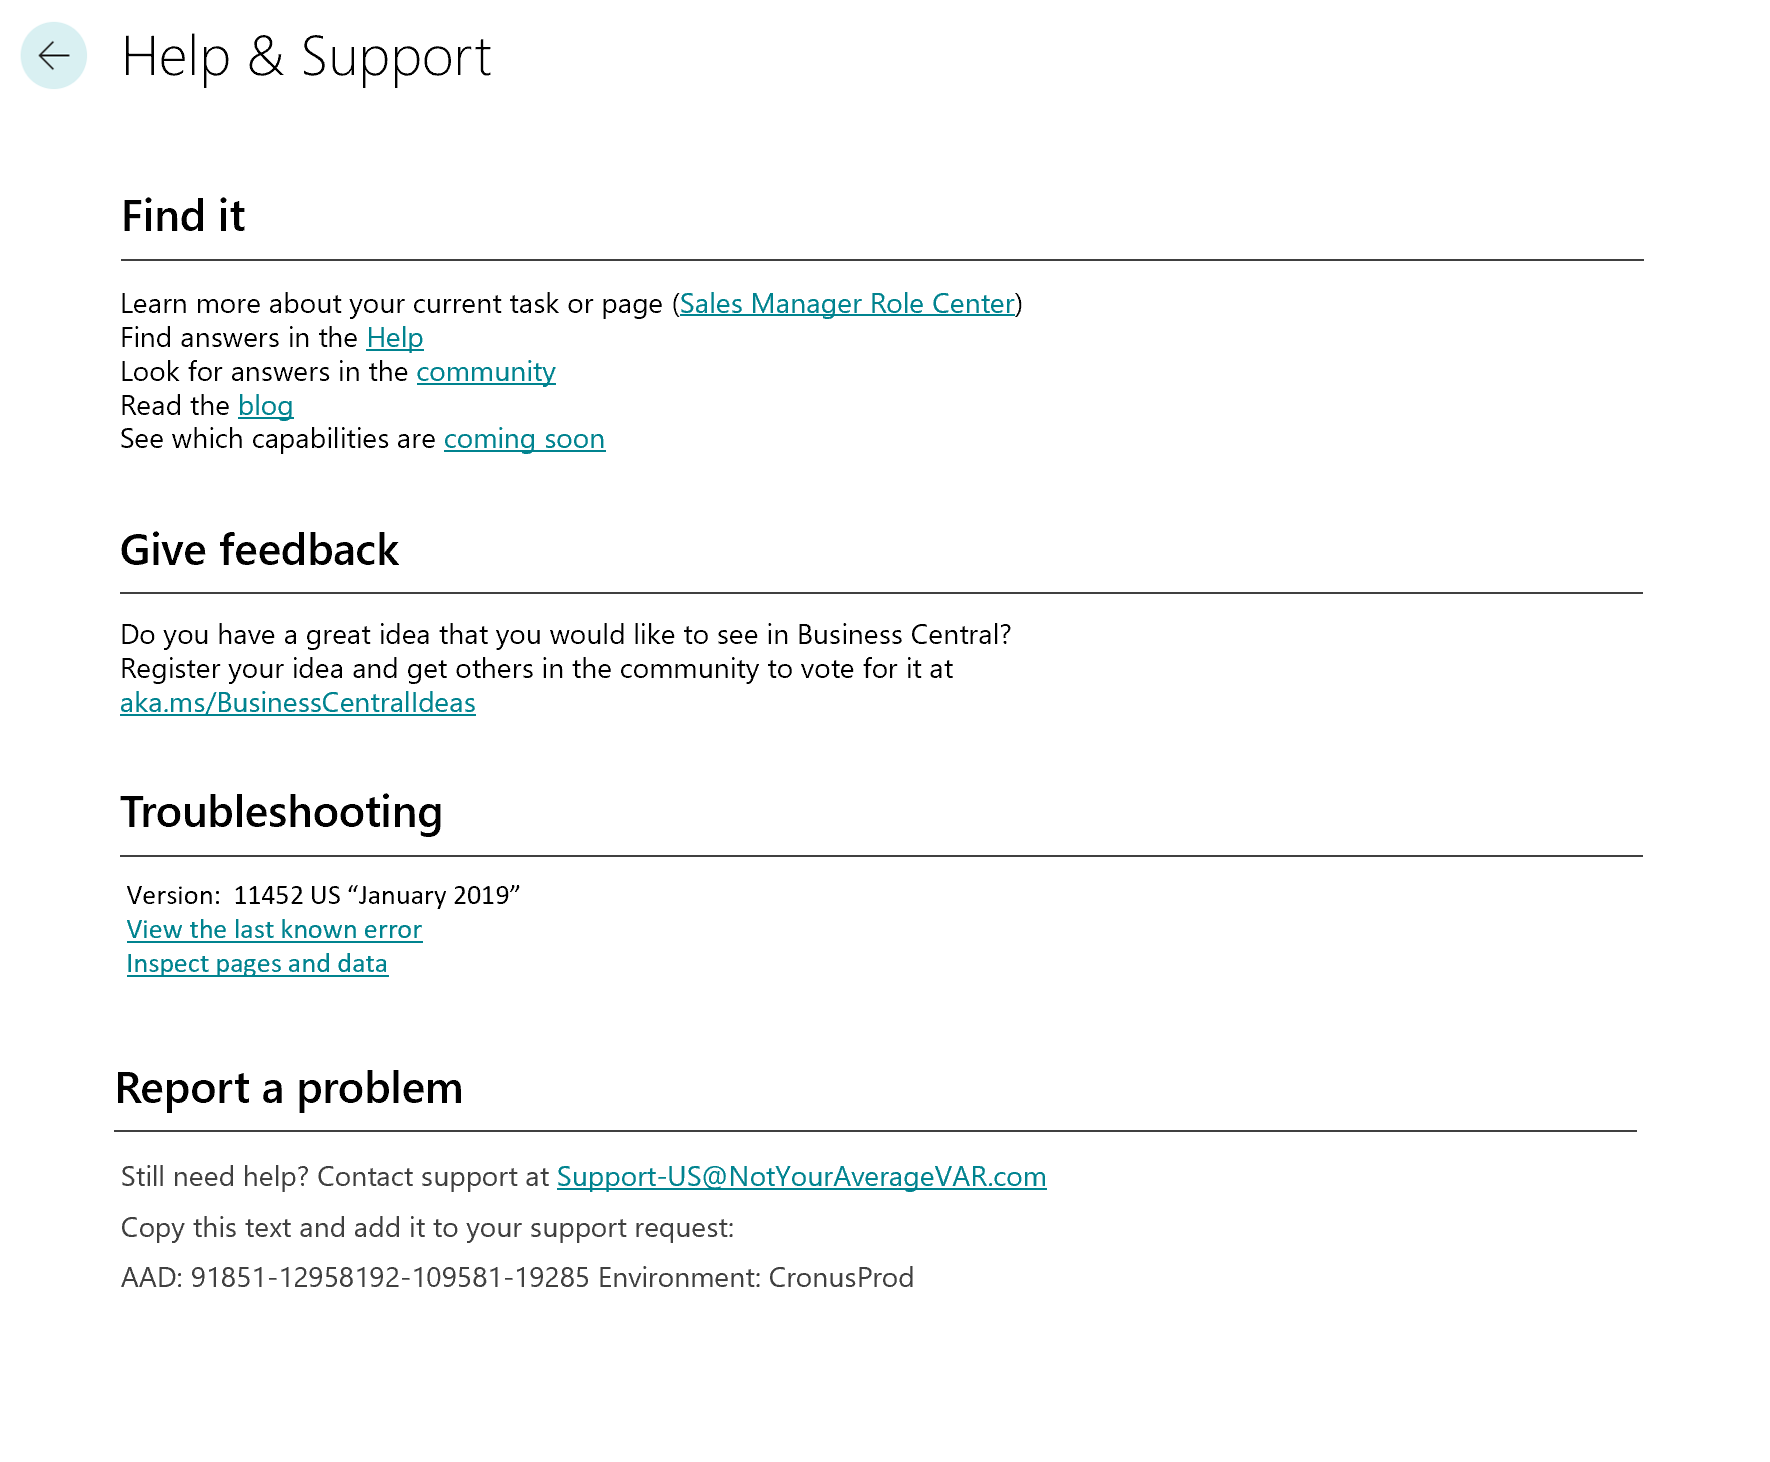 Troubleshooting and support resources page